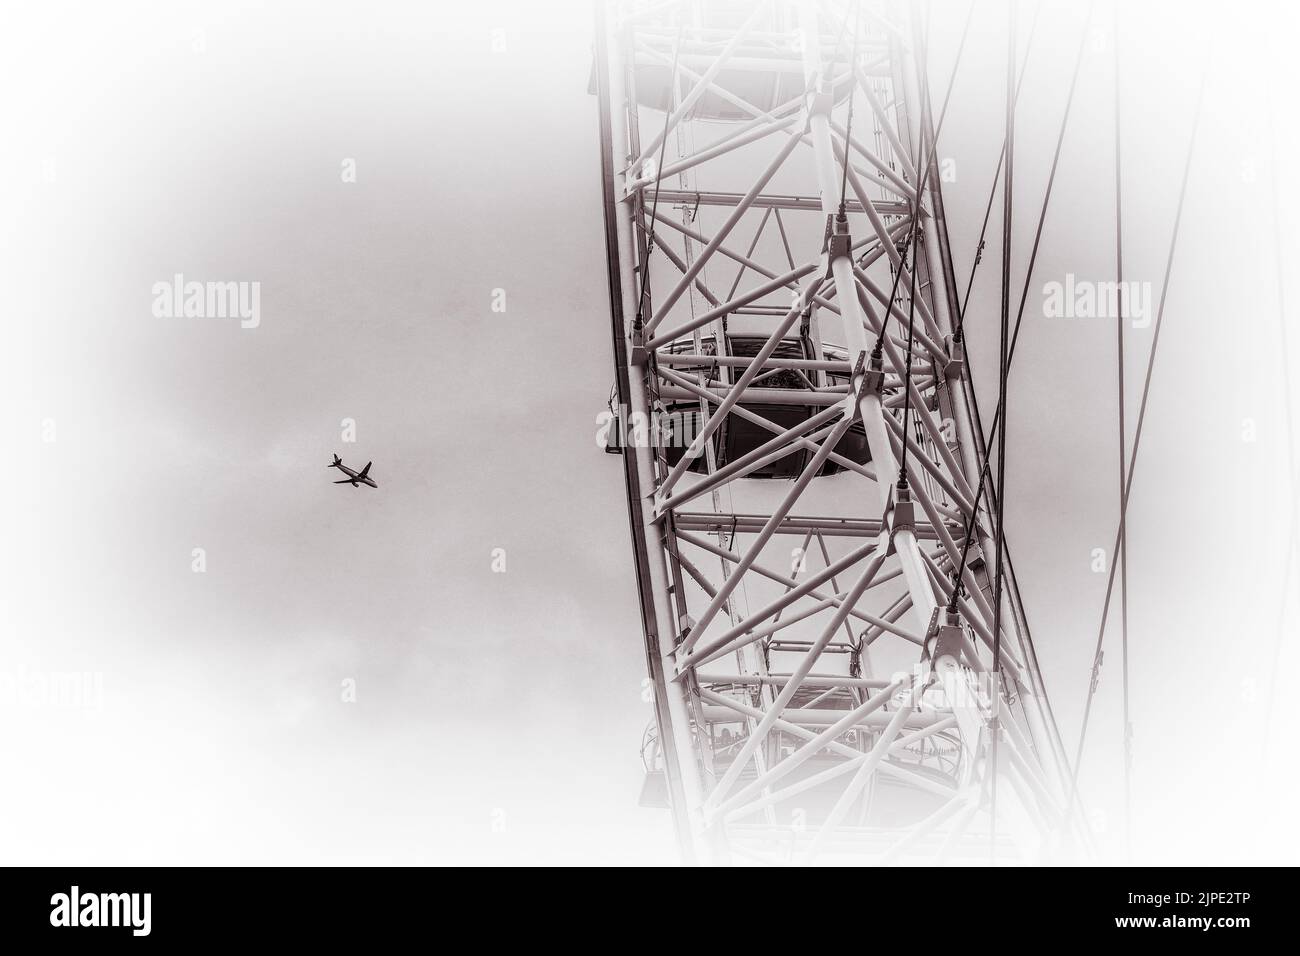 A monochrome image of a plane flying in the sky with part of the London Eye in the foreground. Stock Photo